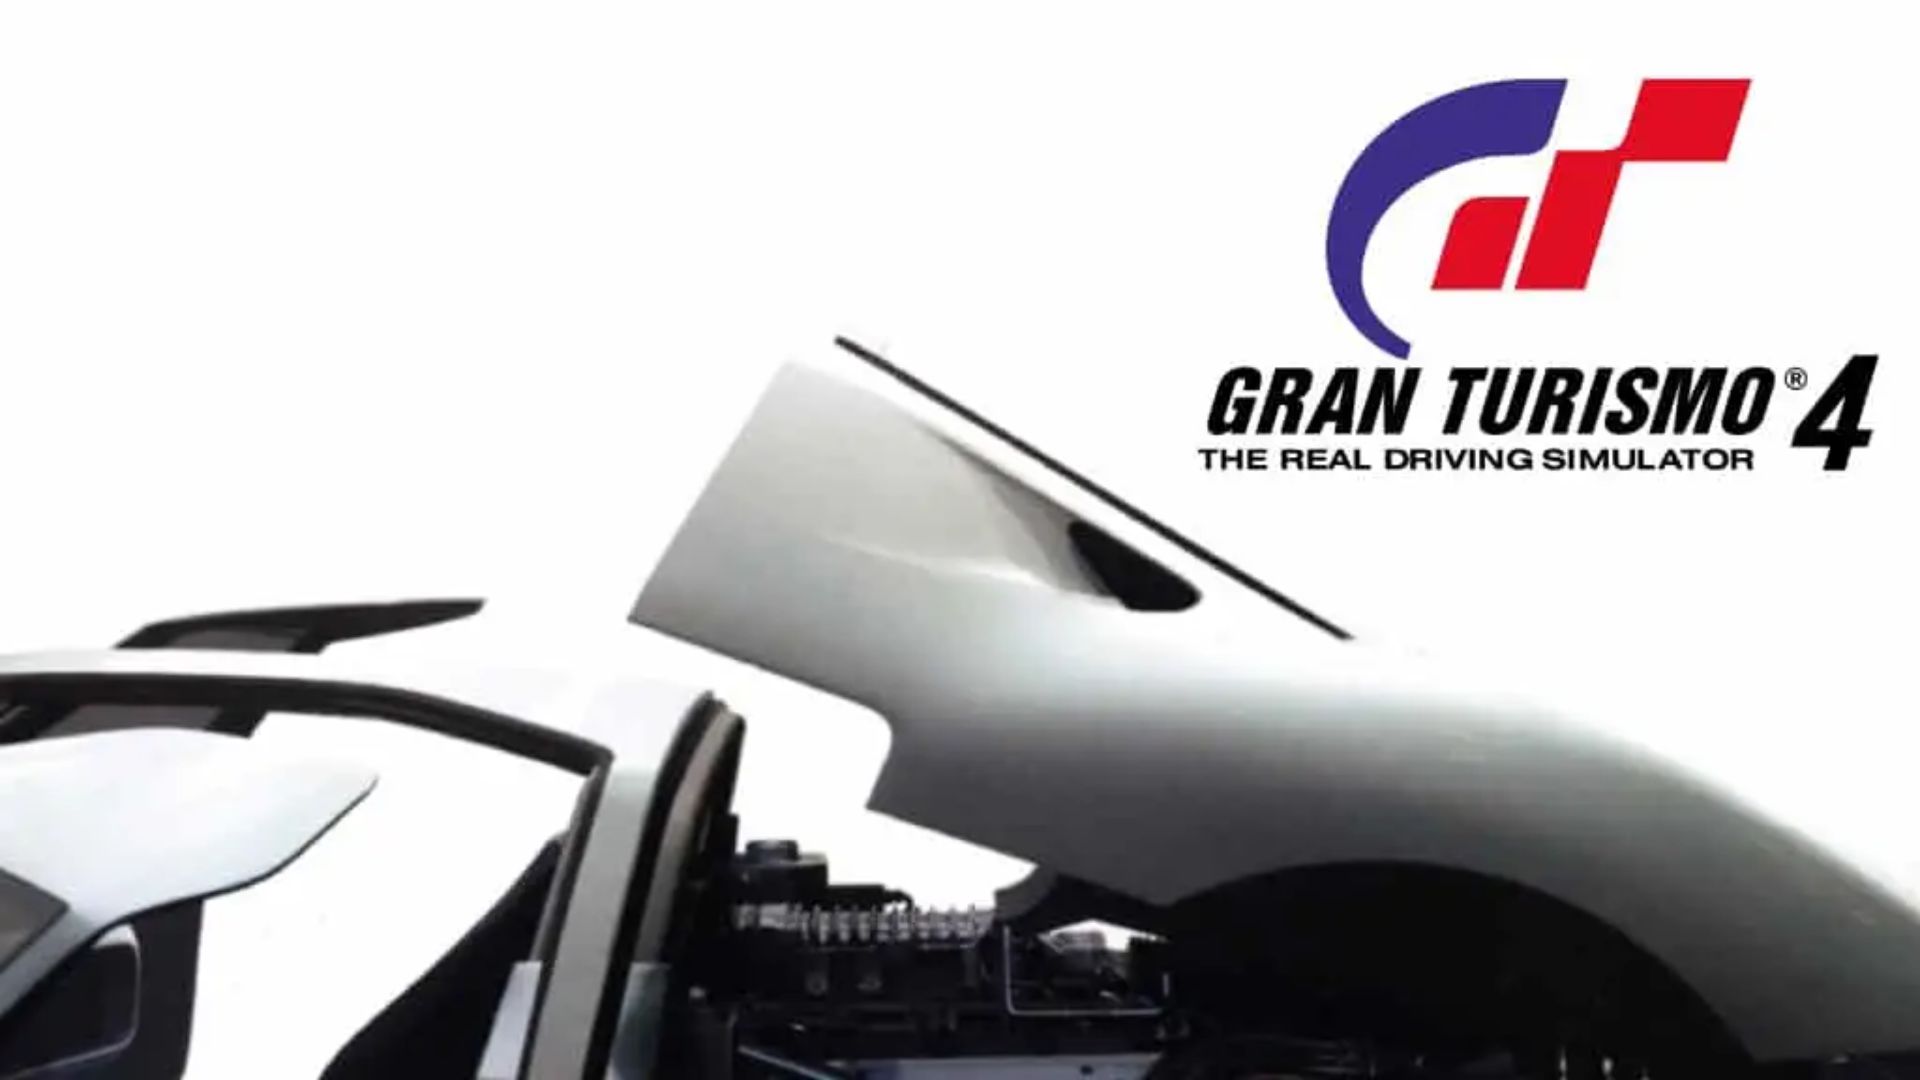 PS2's Gran Turismo 4 Cheat Codes Found Nearly 20 Years Later